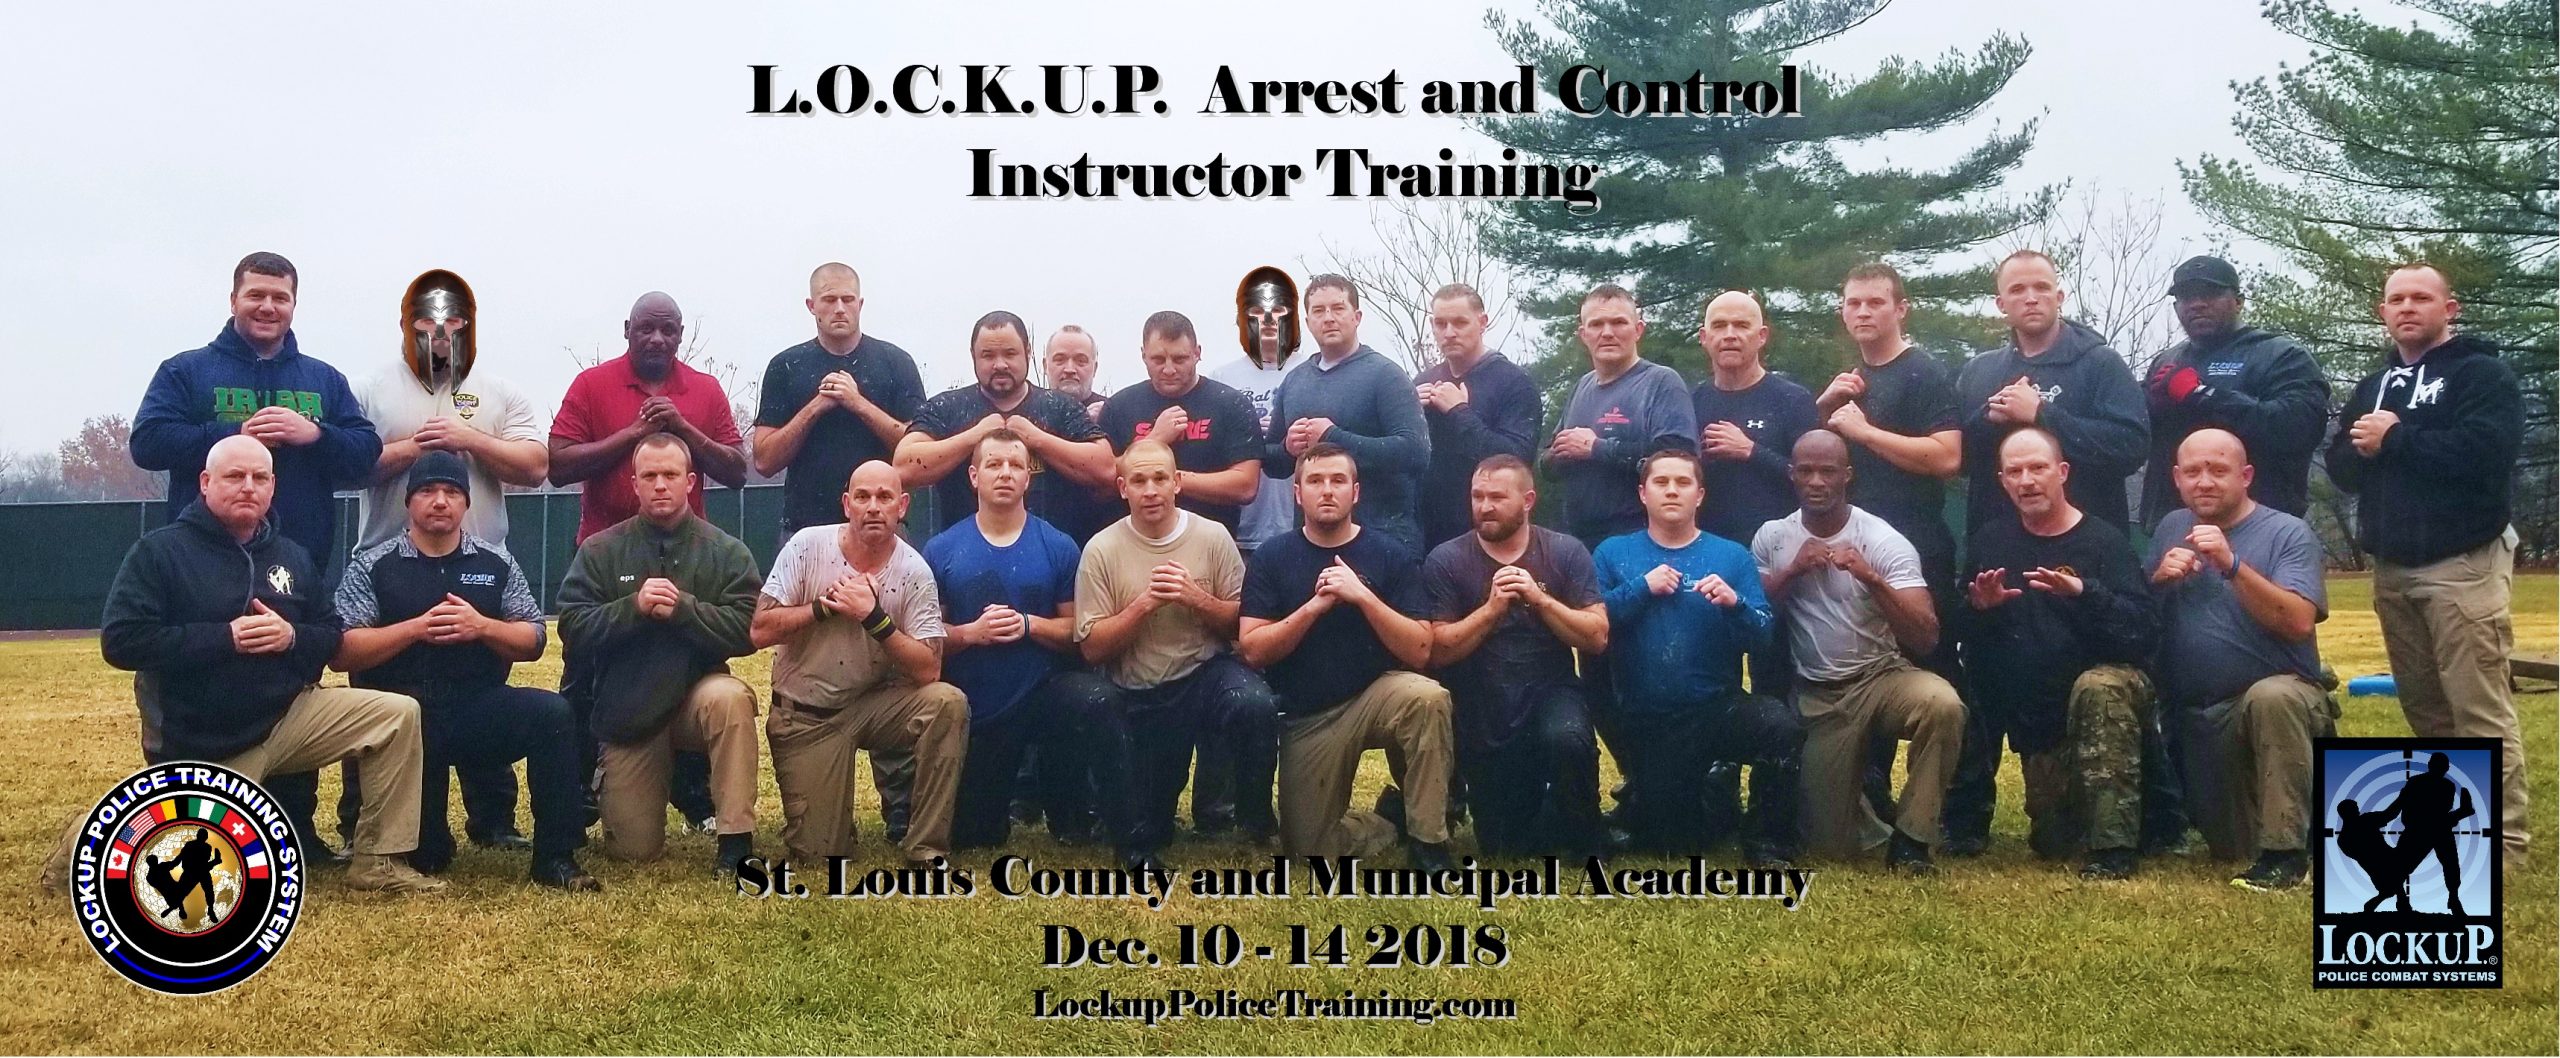 St Louis MO – L.O.C.K.U.P. ® Police Training Arrest And Control Instructor Course